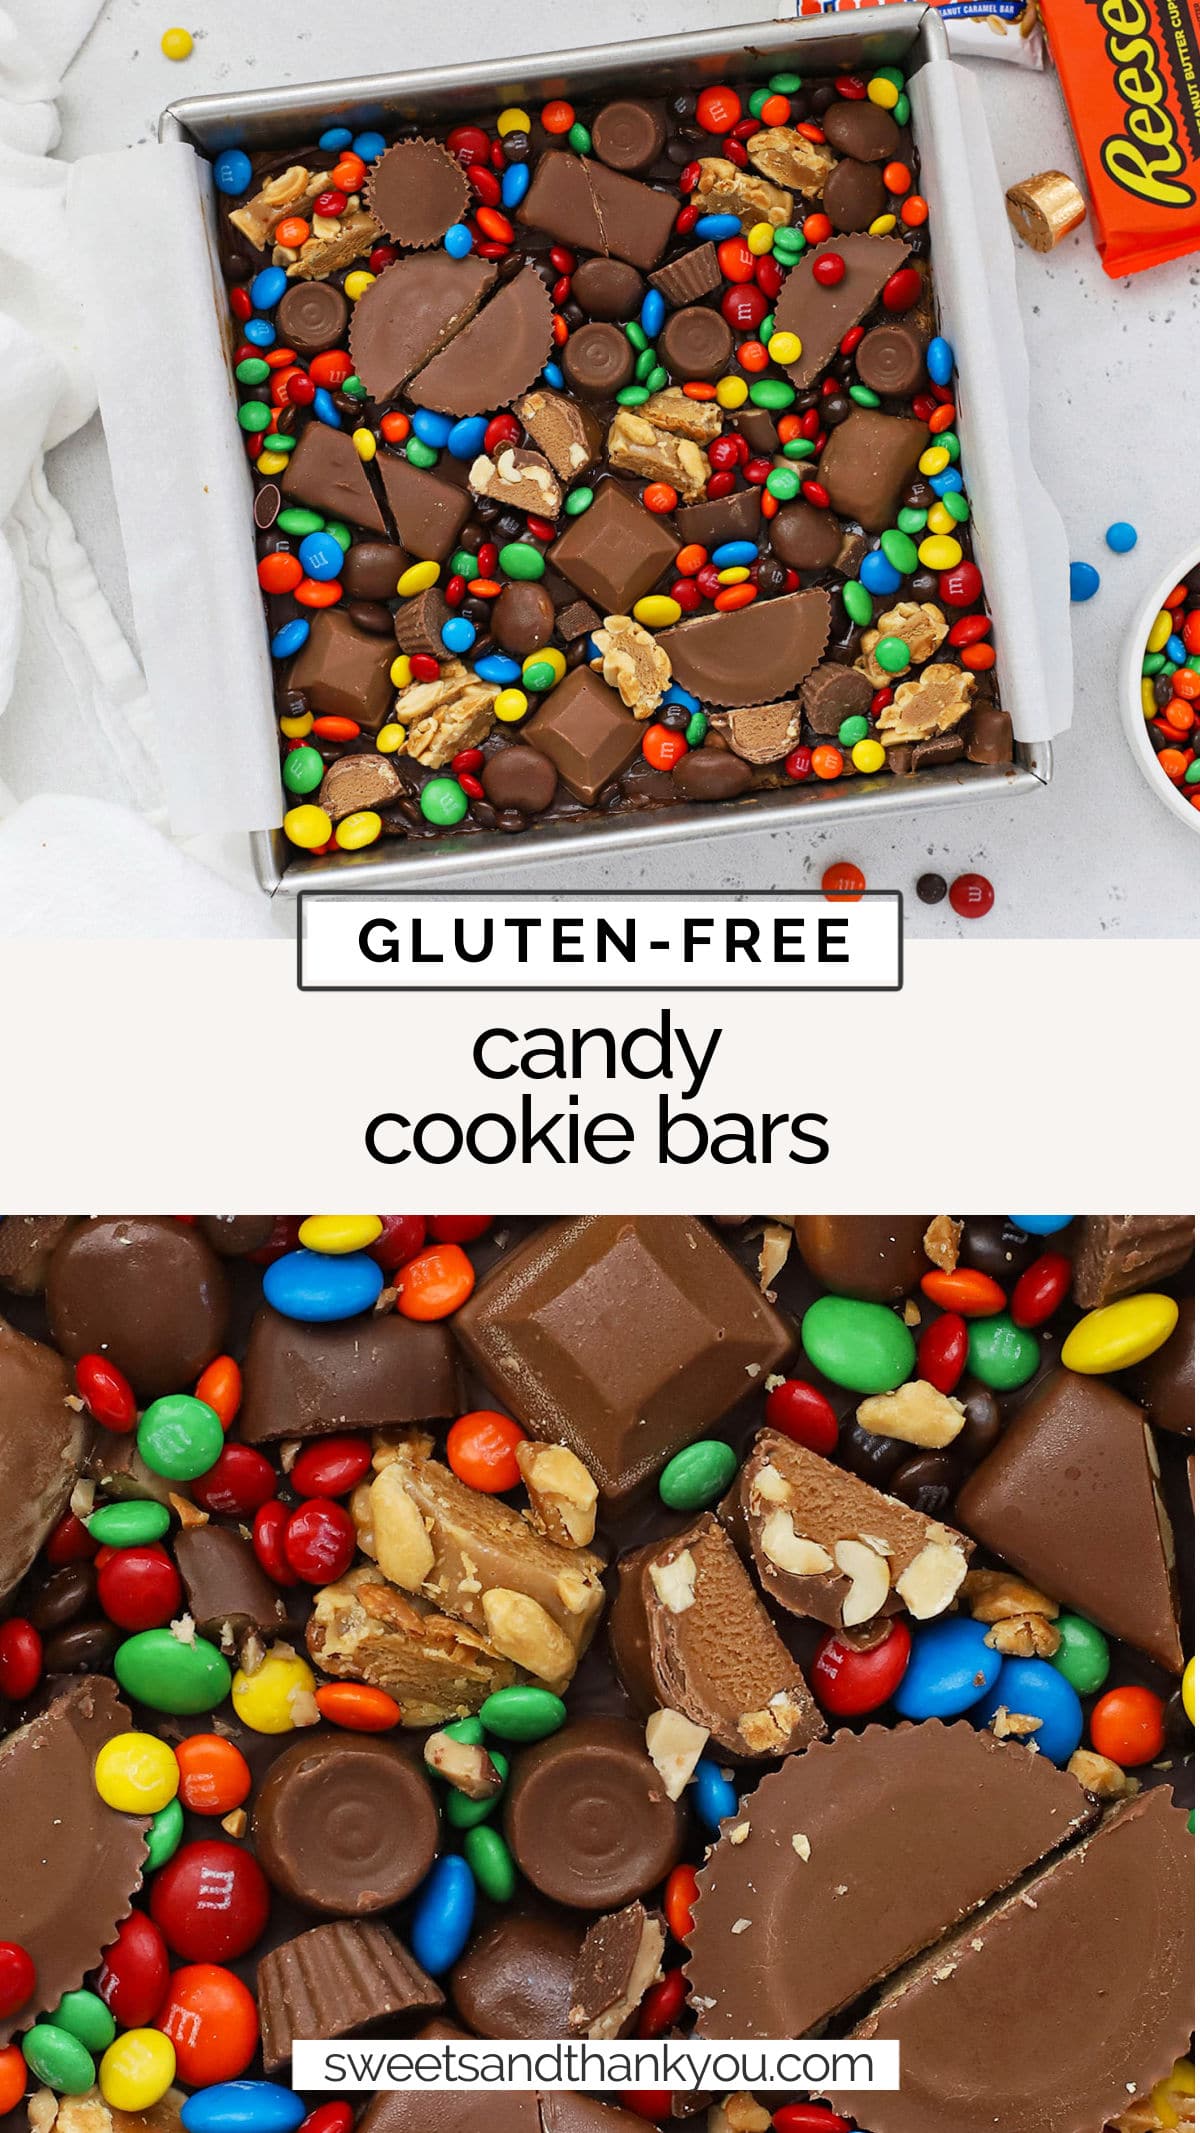 These gluten-free candy cookie bars a fun spin on classic monster cookie bars. They're the perfect way to use leftover candy! / halloween candy cookie bars recipe / leftover candy cookie bars recipe / ways to use leftover candy / recipes for leftover candy / cookie bars with candy / which candy bars are gluten free / baking recipes with leftover candy / ways to use leftover halloween candy / what to bake with leftover candy